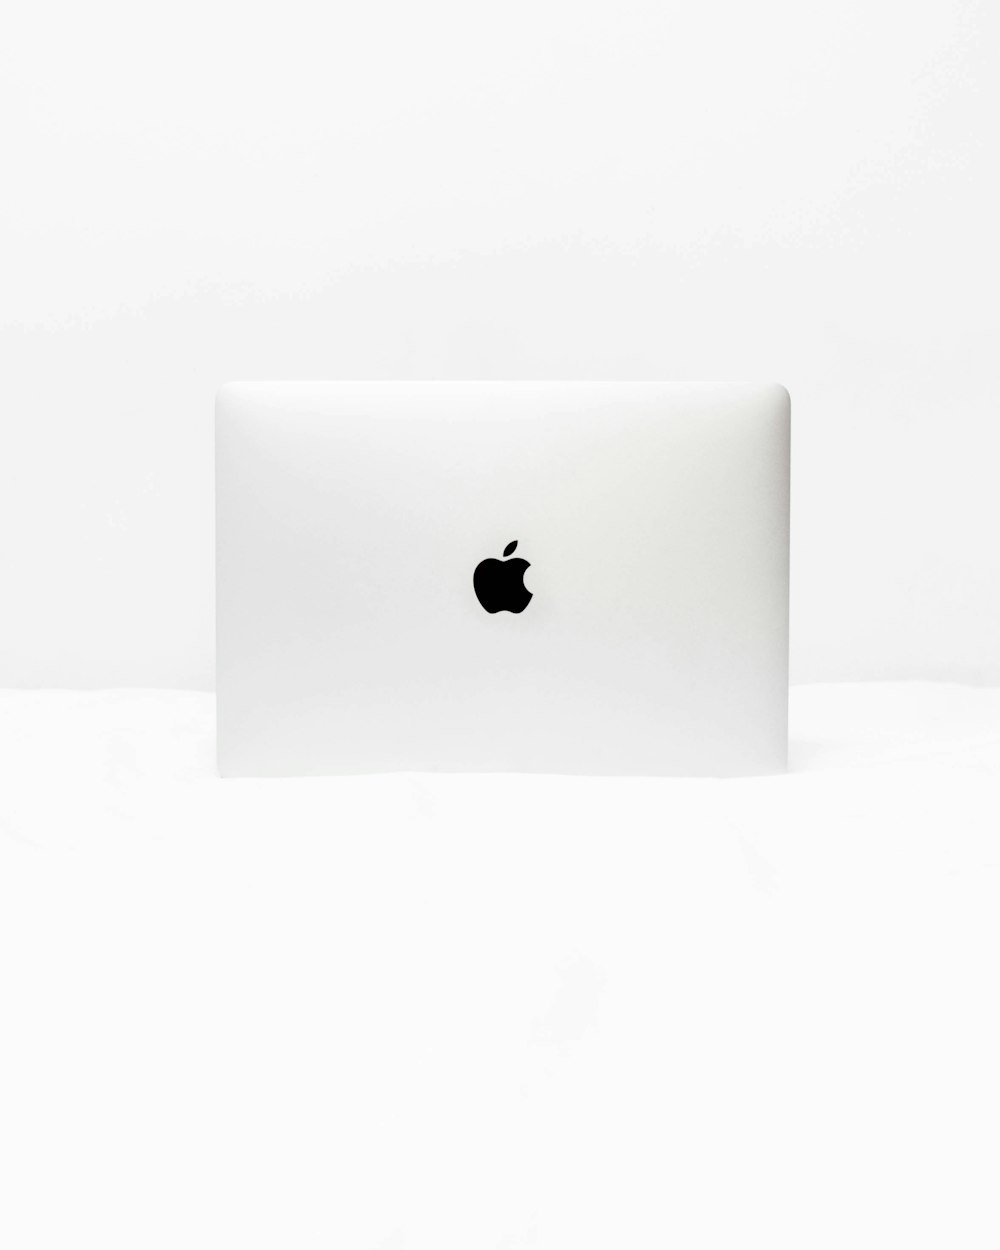 MacBook White open on white surface